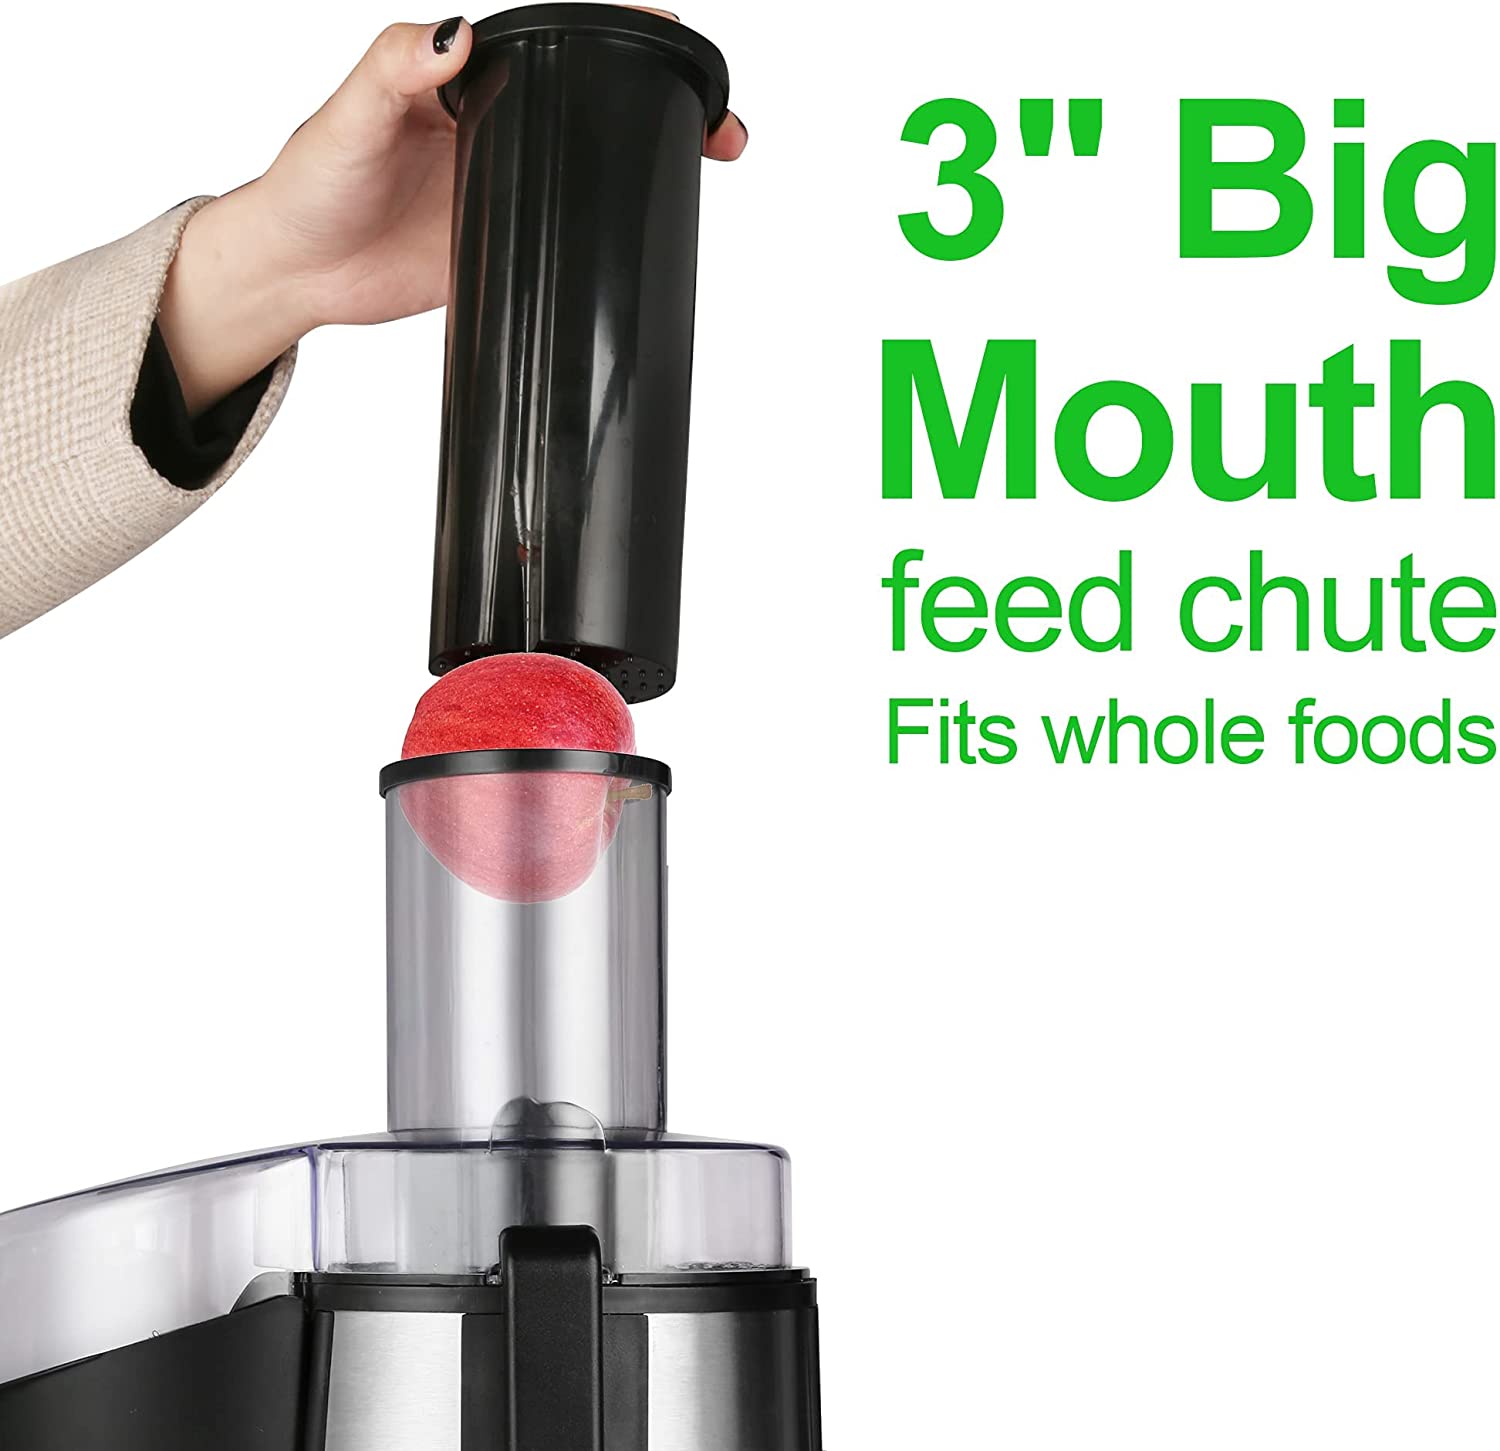 E-Macht Cold Press Juicer Extractor Machines Vegetable and Fruit with Big Mouth 3" Feed Chute, BPA-Free, 850W Motor